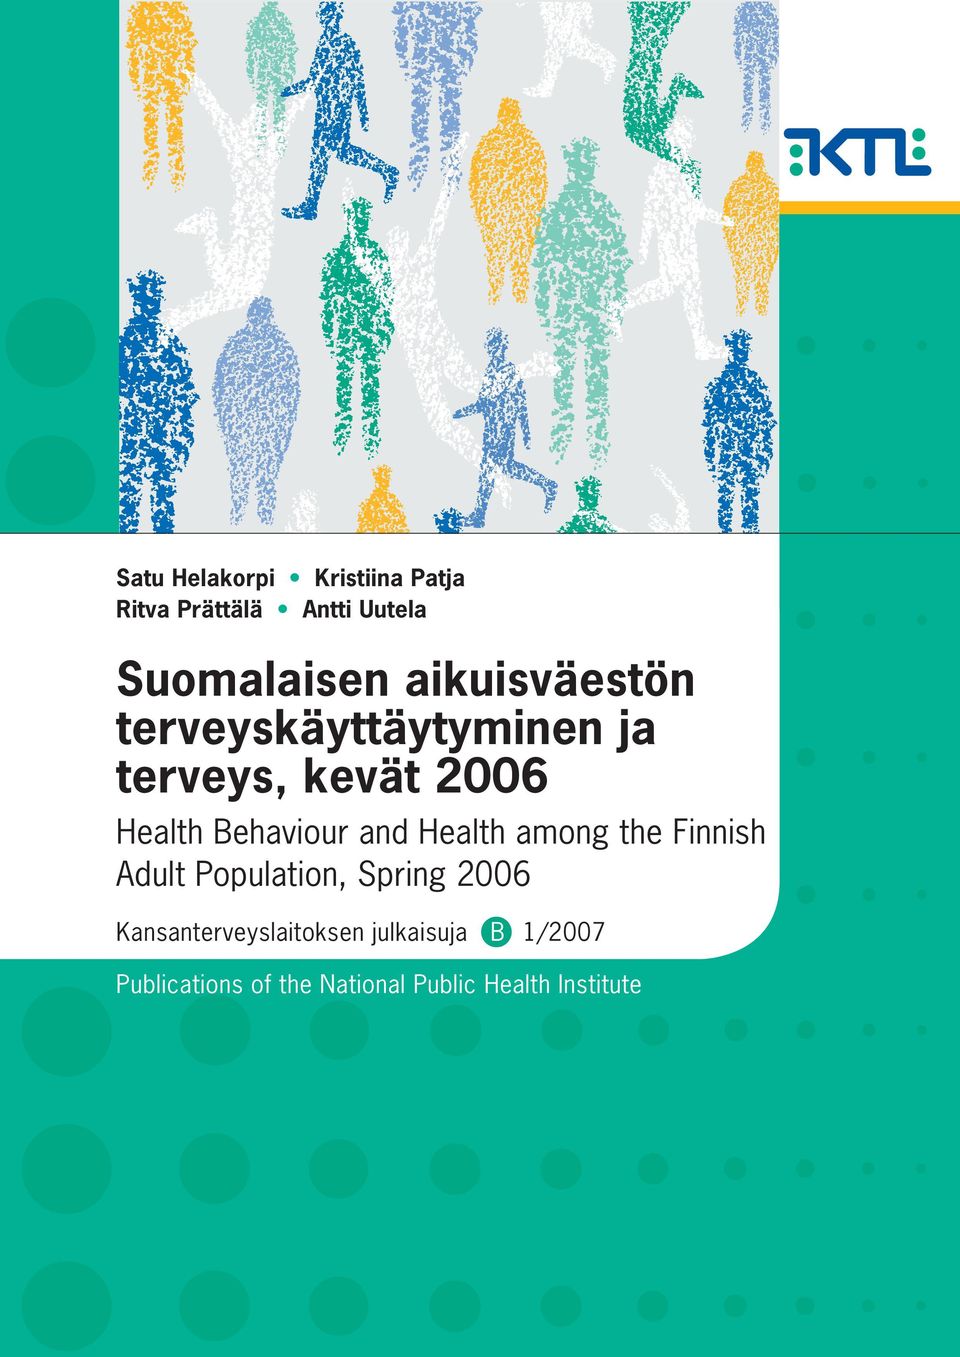 and Health among the Finnish Adult Population, Spring